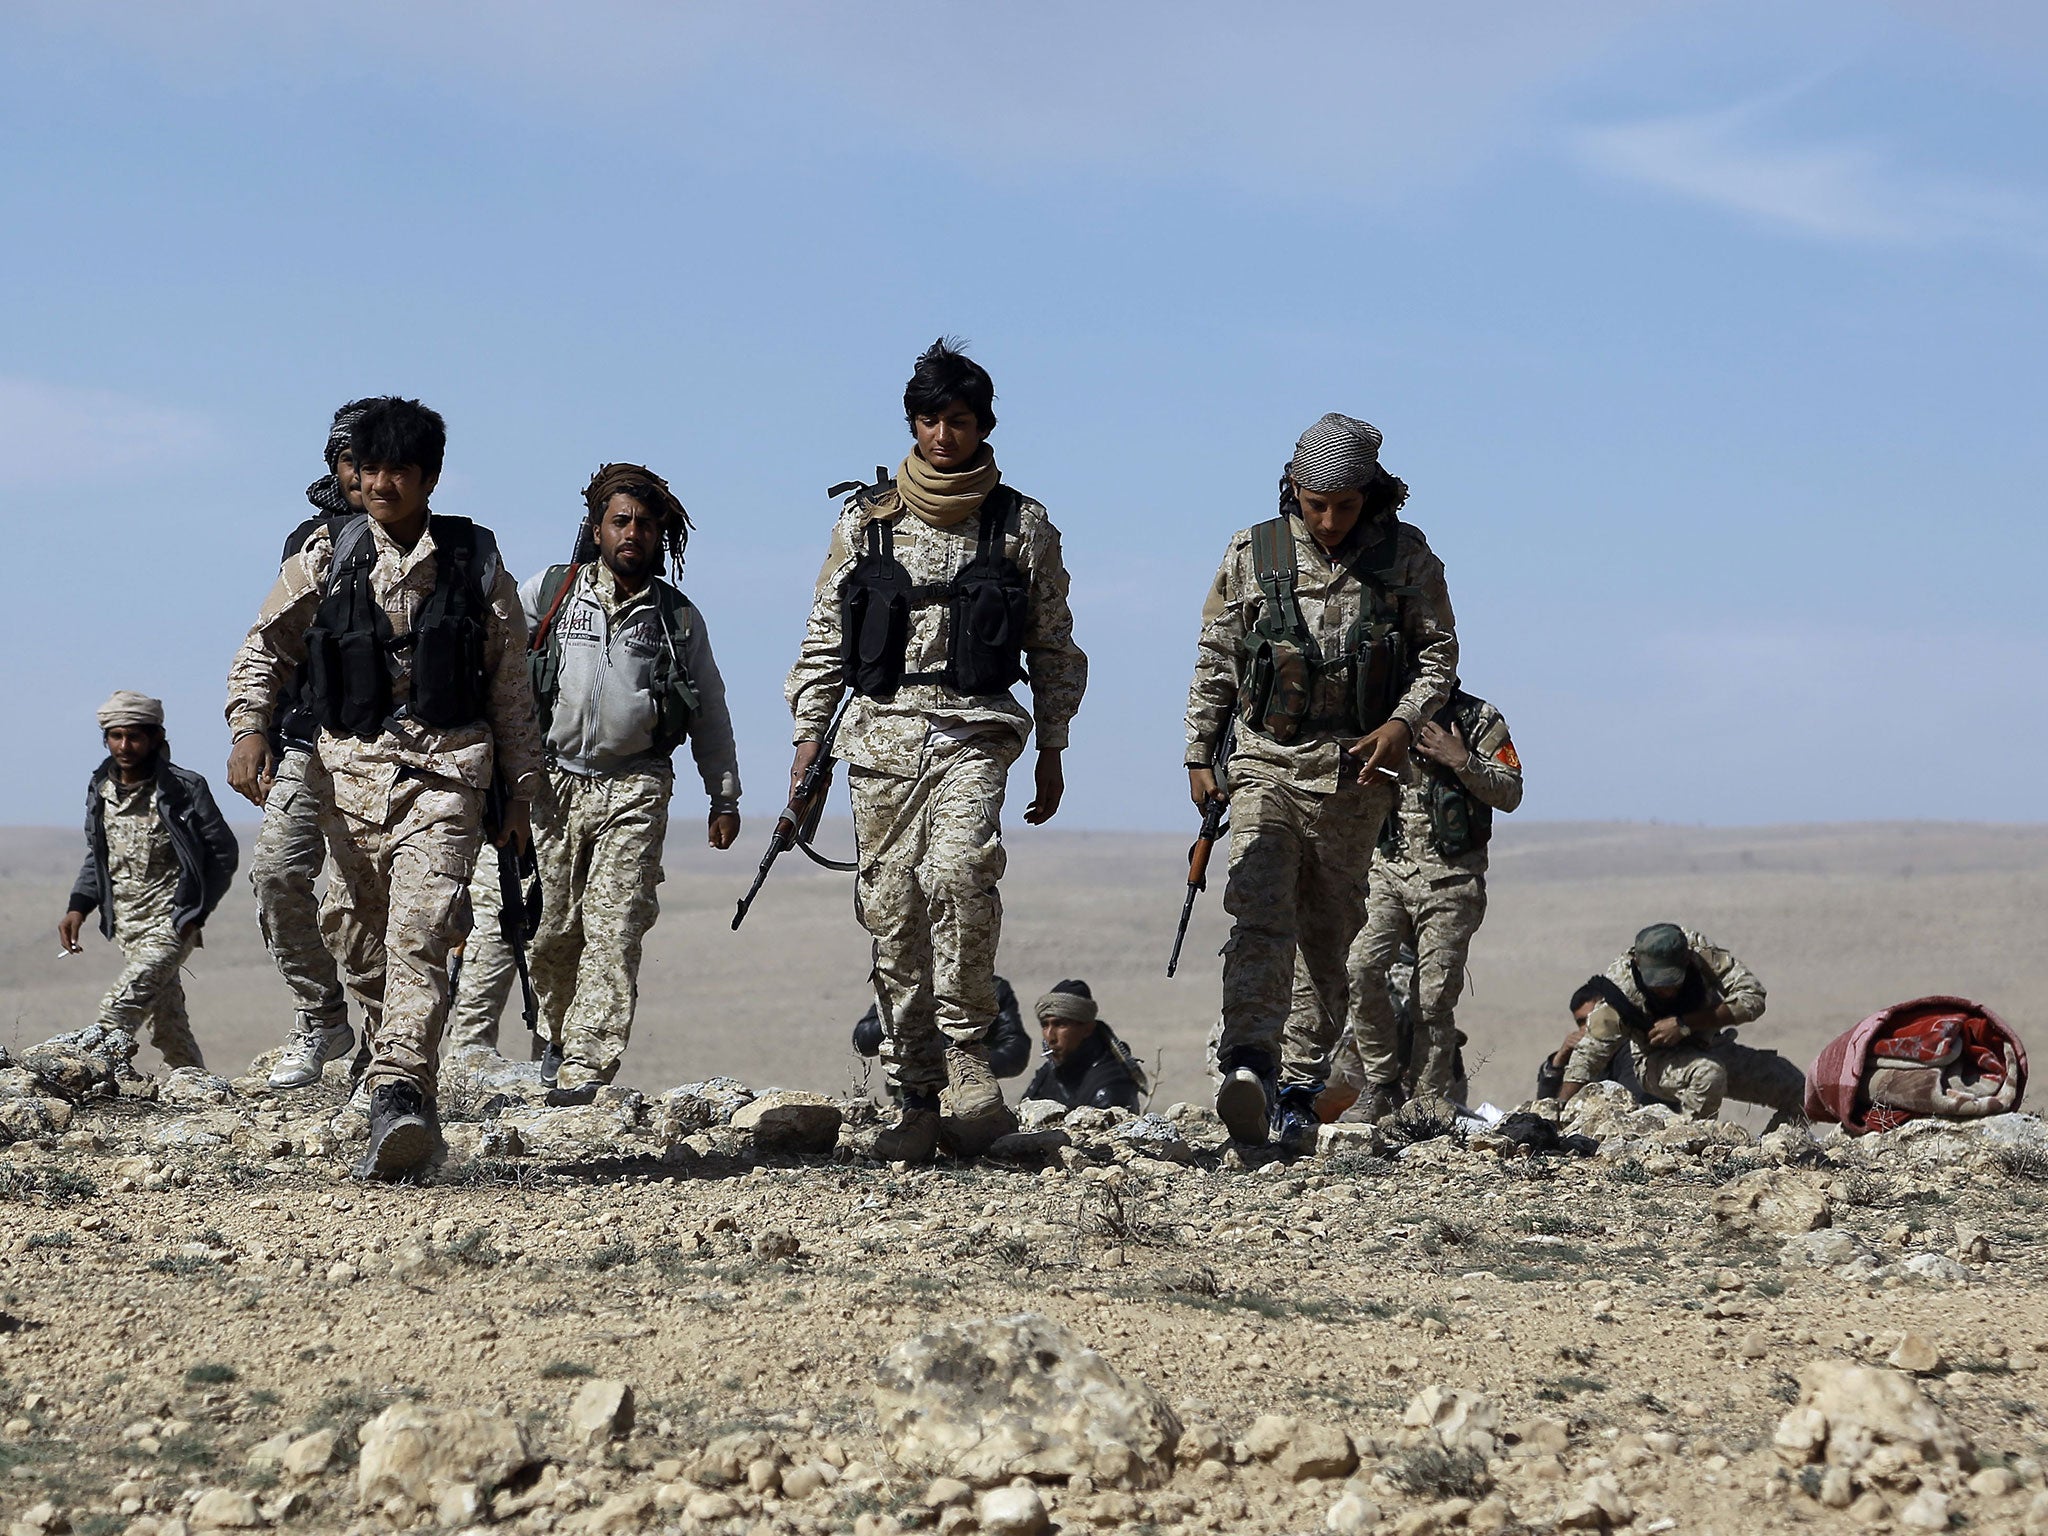 Fighters from the Syrian Democratic Forces (SDF) gather on the outskirts of the town of al-Shadadi in the northeastern Syrian province of Hasakeh, on 19 February, 2016